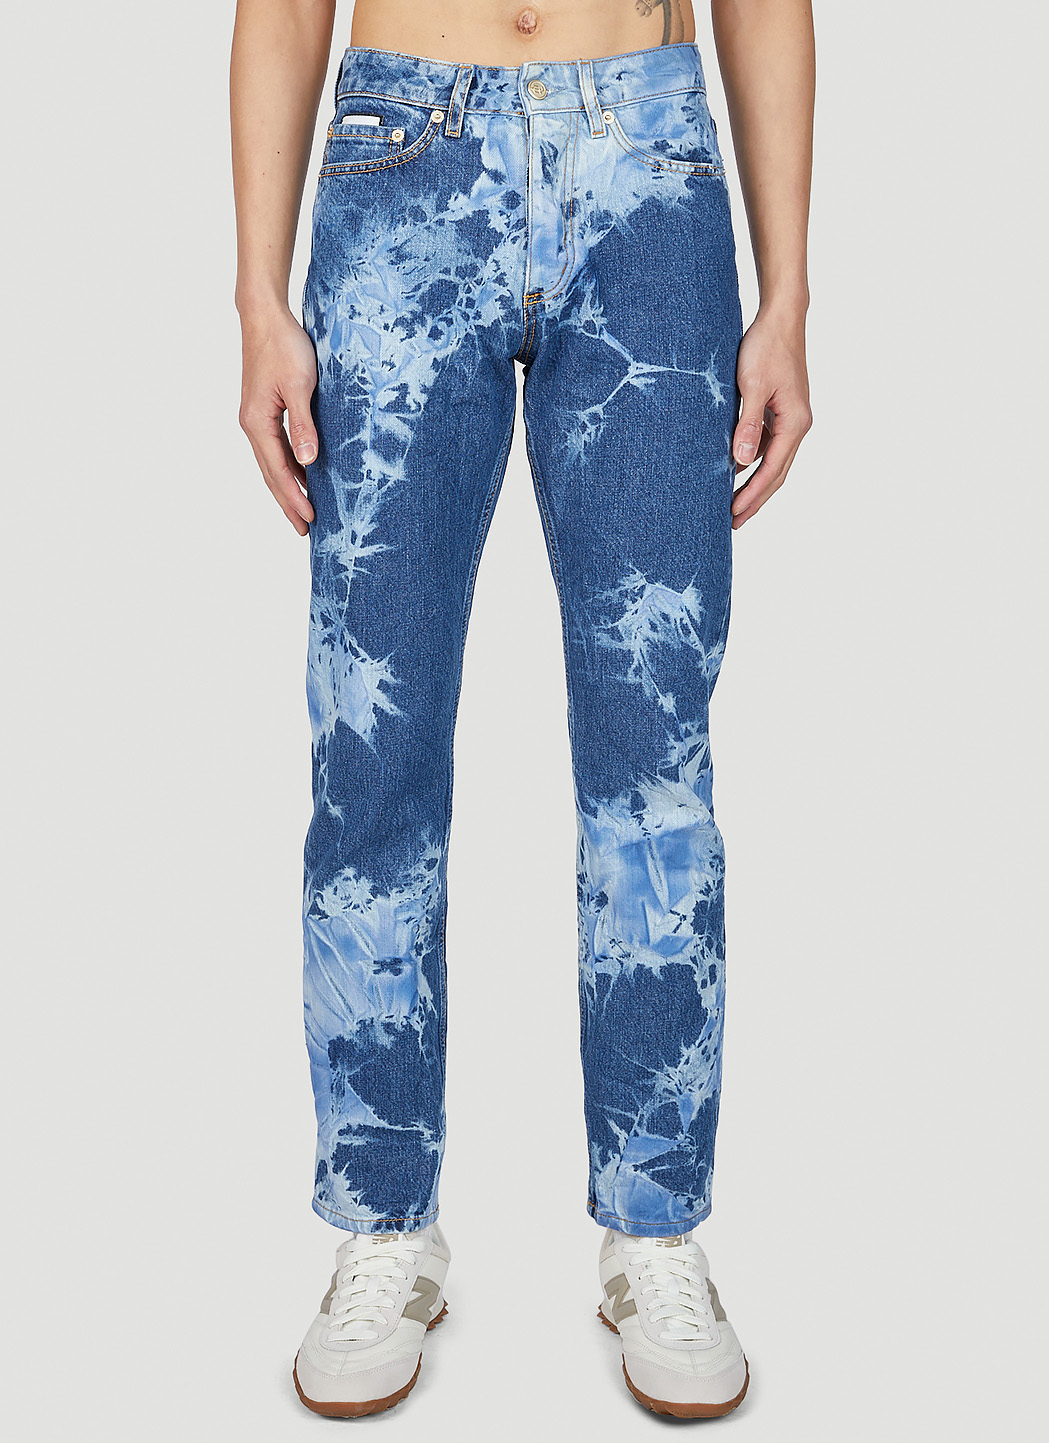 Orion Marble Jeans